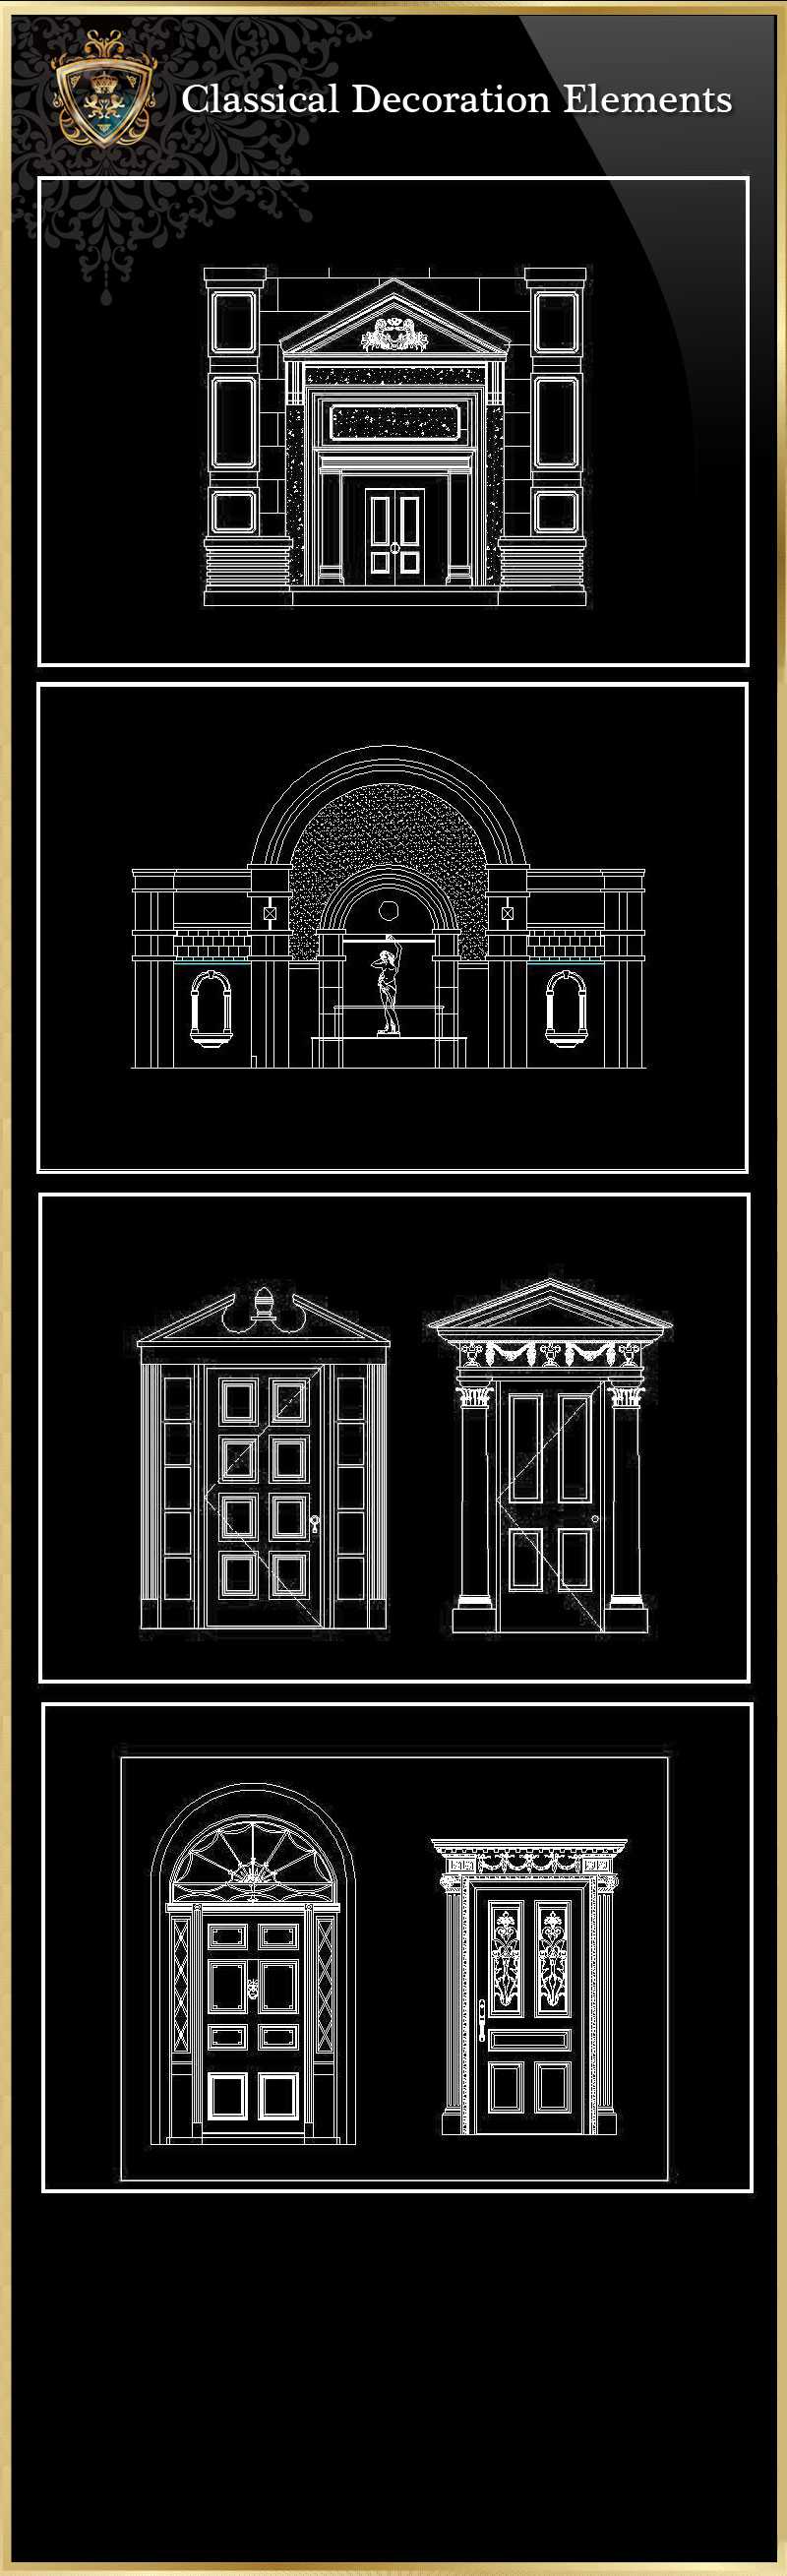 ★【Classical Decoration Elements 04】Download Luxury Architectural Design CAD Drawings--Over 20000+ High quality CAD Blocks and Drawings Download!